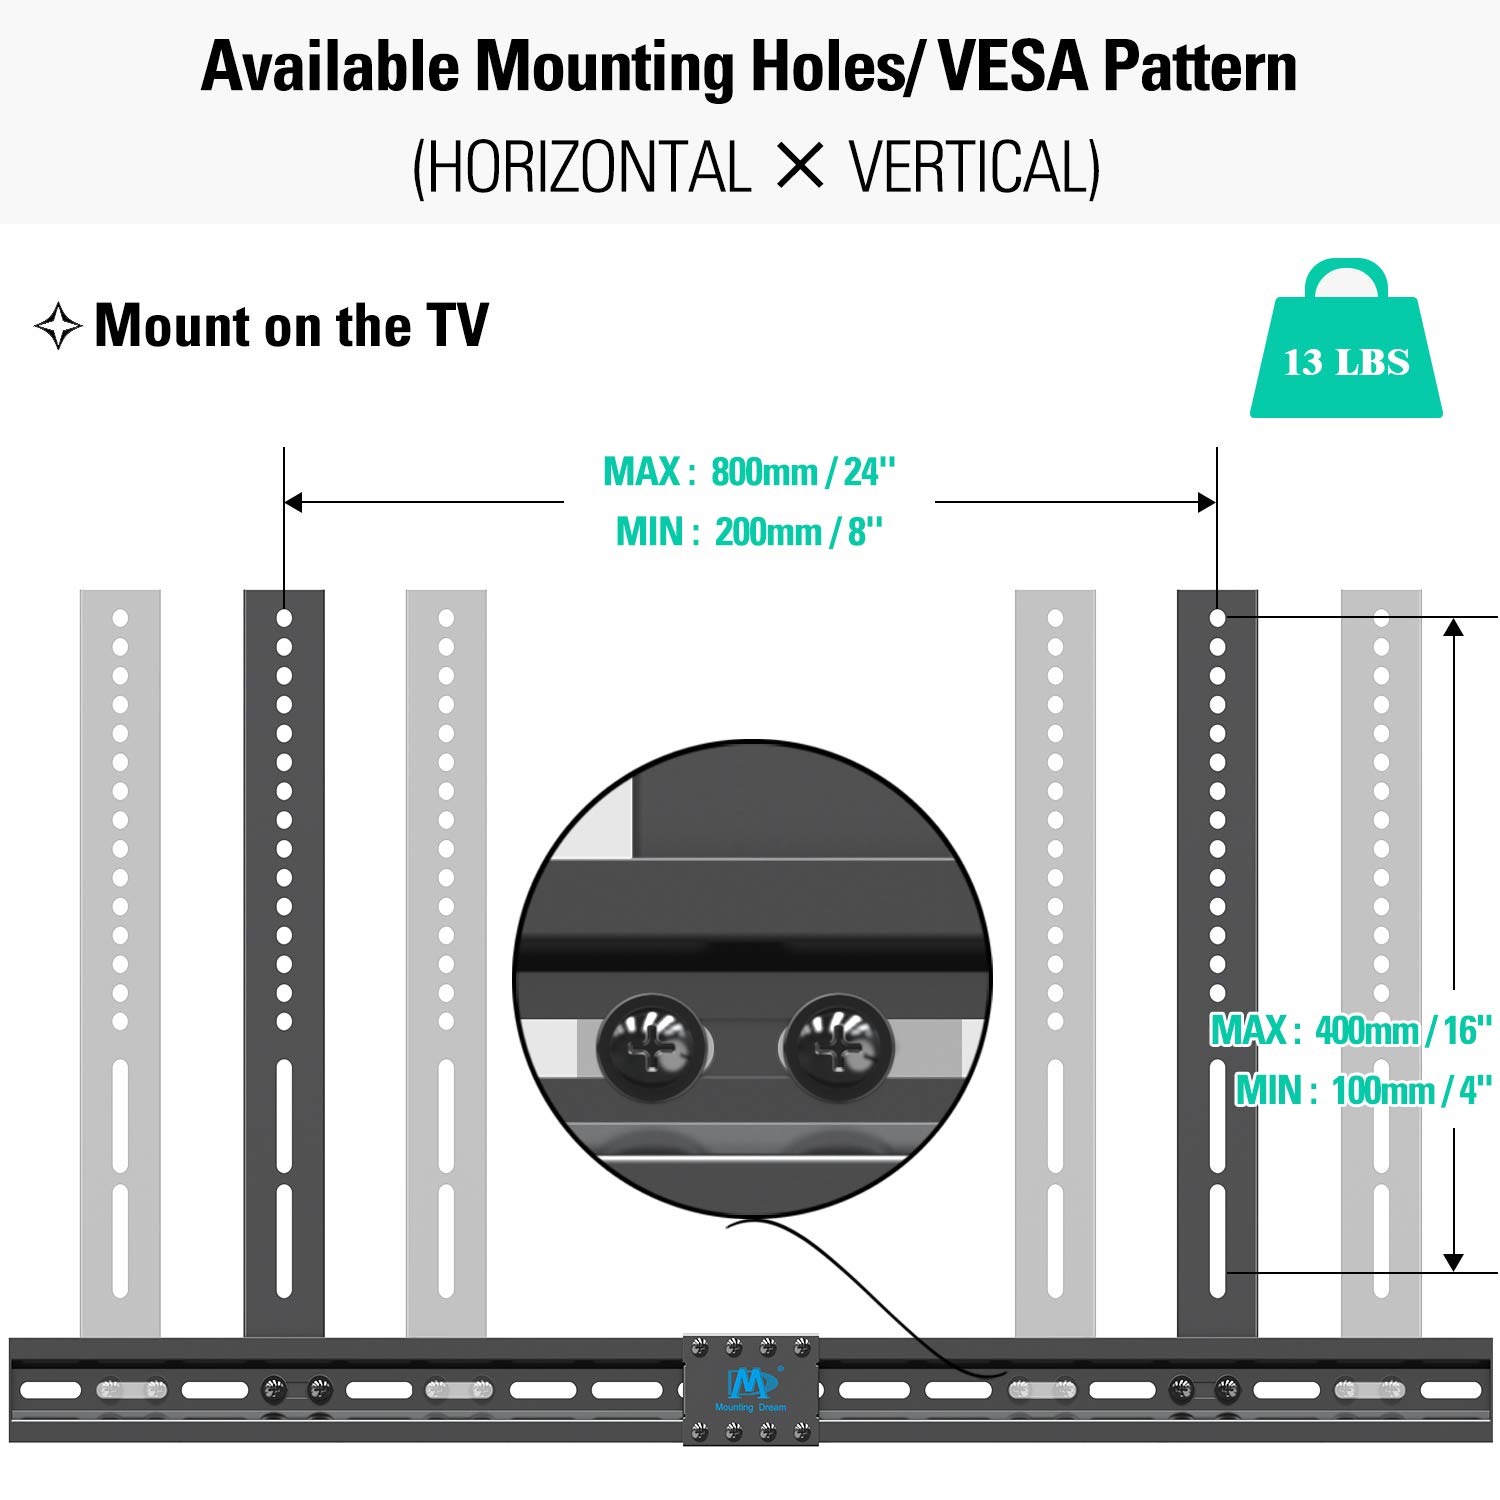 Mounting Dream Full Motion TV Mount Wall Bracket TV Wall Mounts for 42-75 Inch TV & Soundbar Mount Sound Bar TV Bracket for Mounting Above or Under TV Fits Most of Sound Bars Up to 13 Lbs